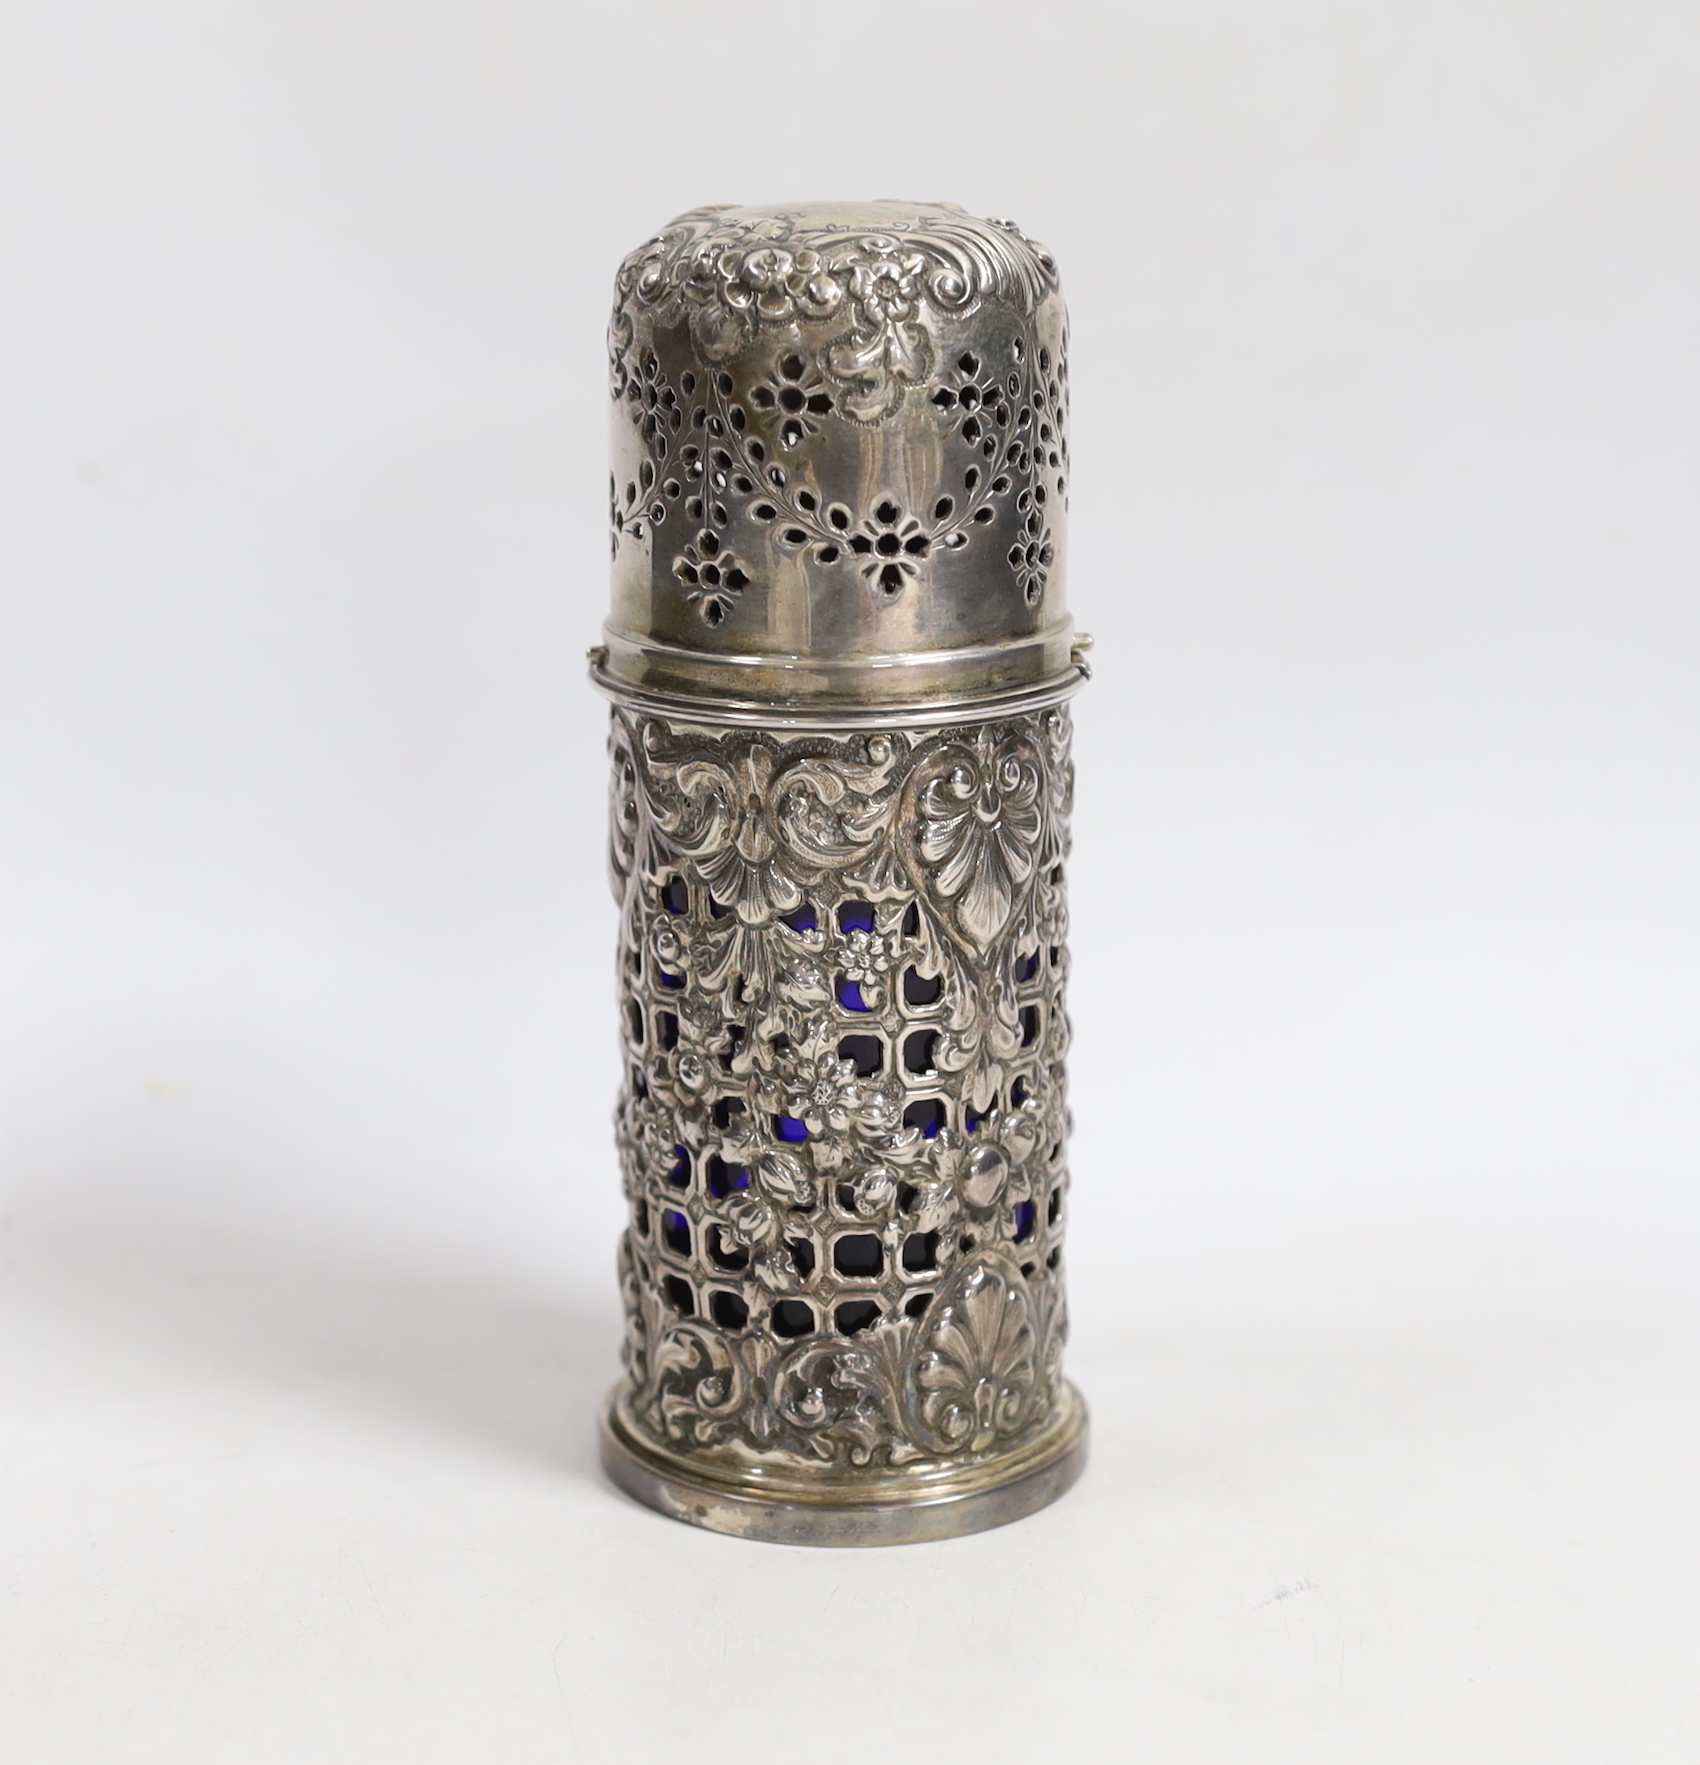 A late Victorian pierced silver lighthouse sugar caster, Horace Woodward & Co Ltd, London, 1898, with blue glass liner, 15.7cm.